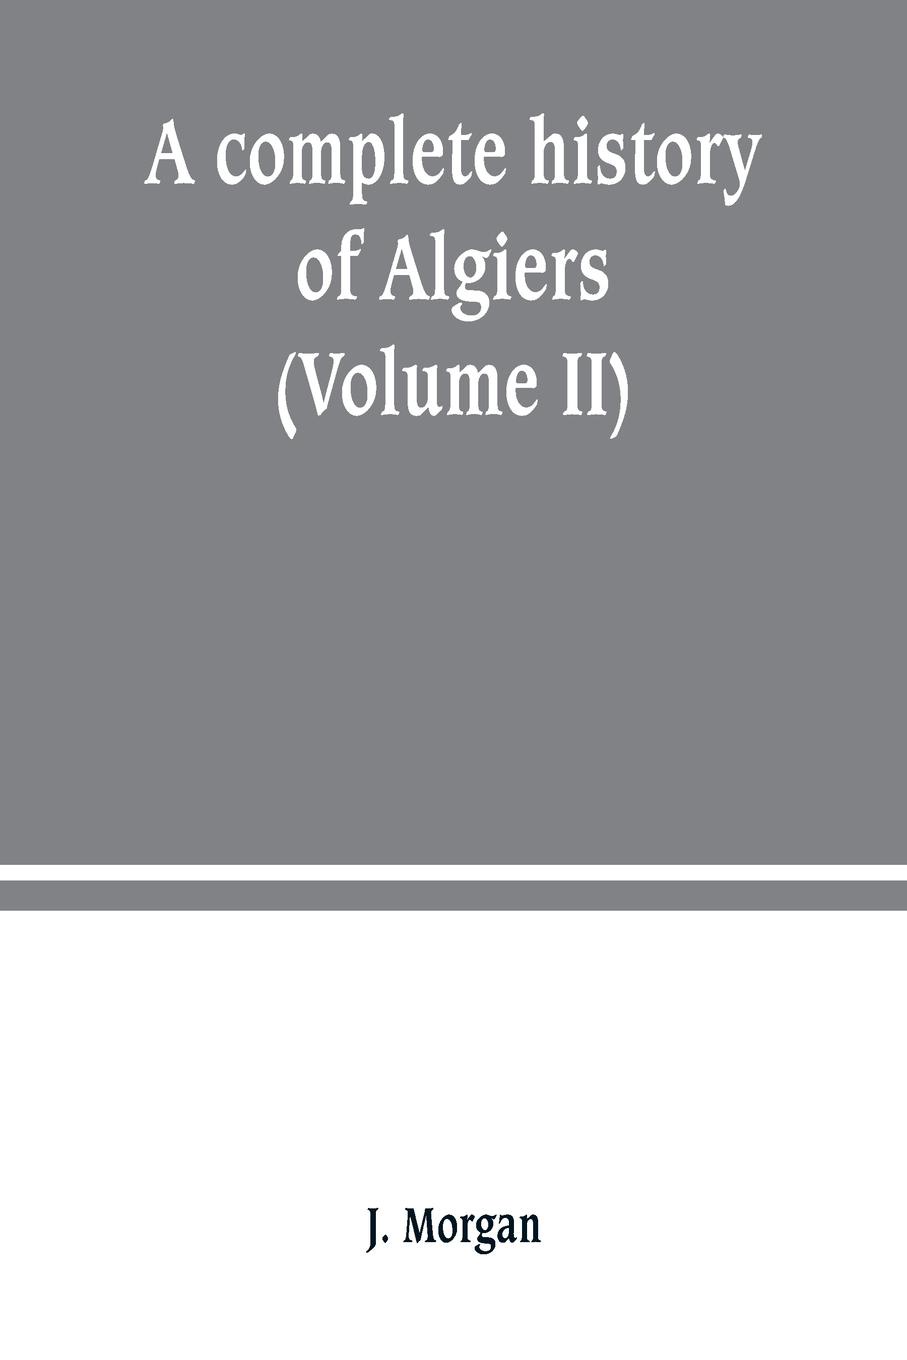 A complete history of Algiers. from the earlirft to the prefent times the whole interfperfed with many curious remarks and paffages, not touched on by any writer whatever (Volume II)